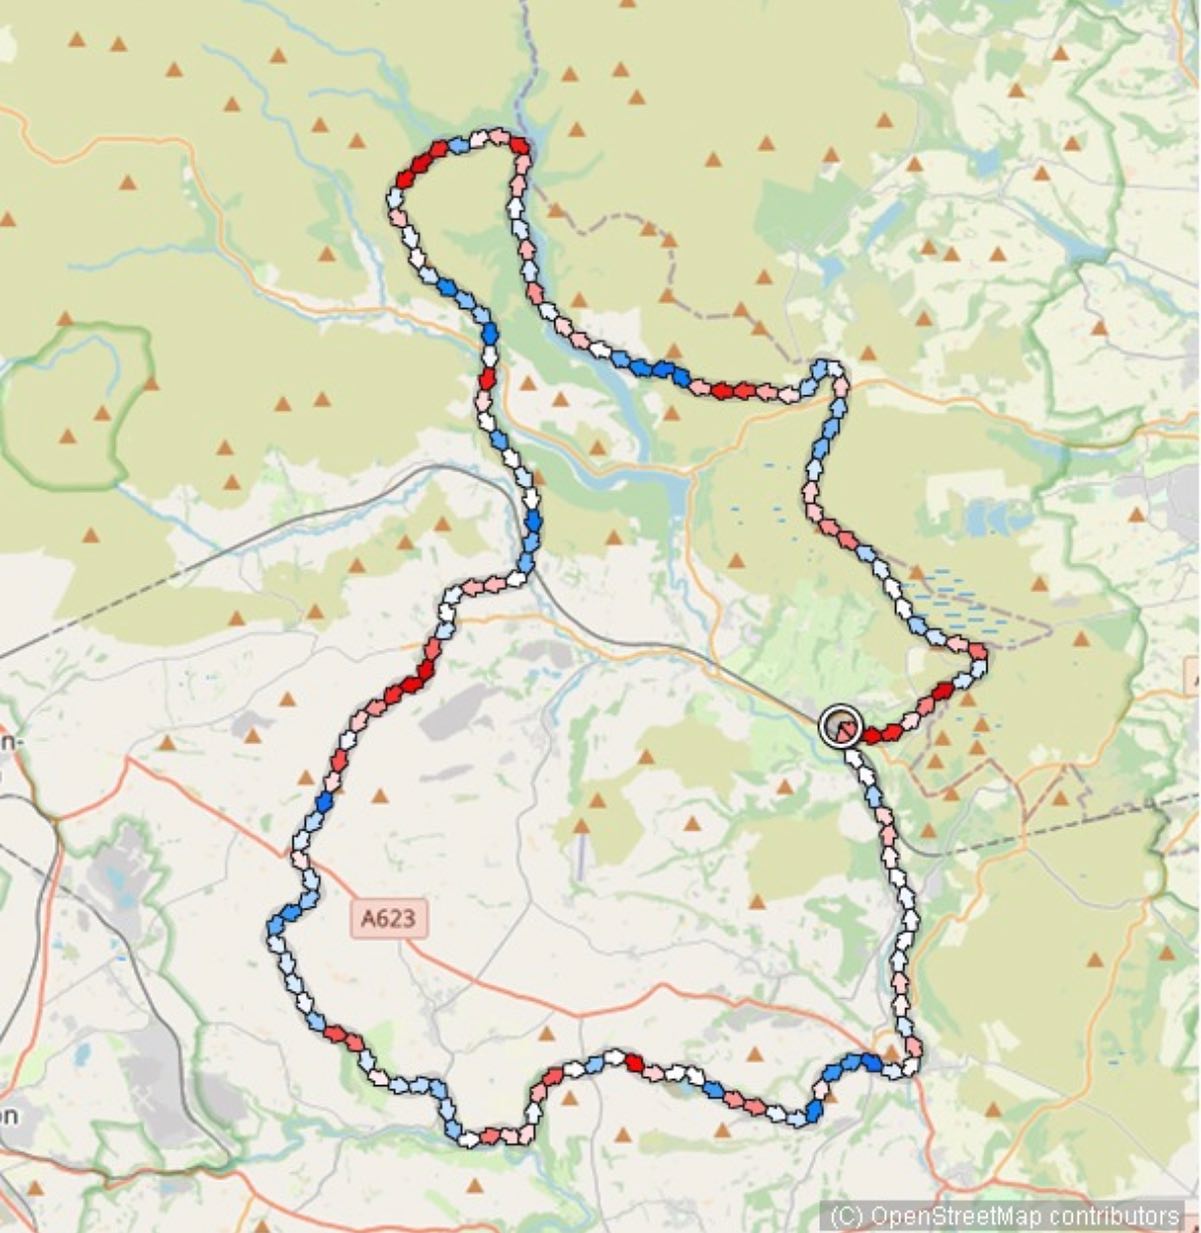 To minimise our event's impact and allow you to make tactical route choices, in almost all areas ...